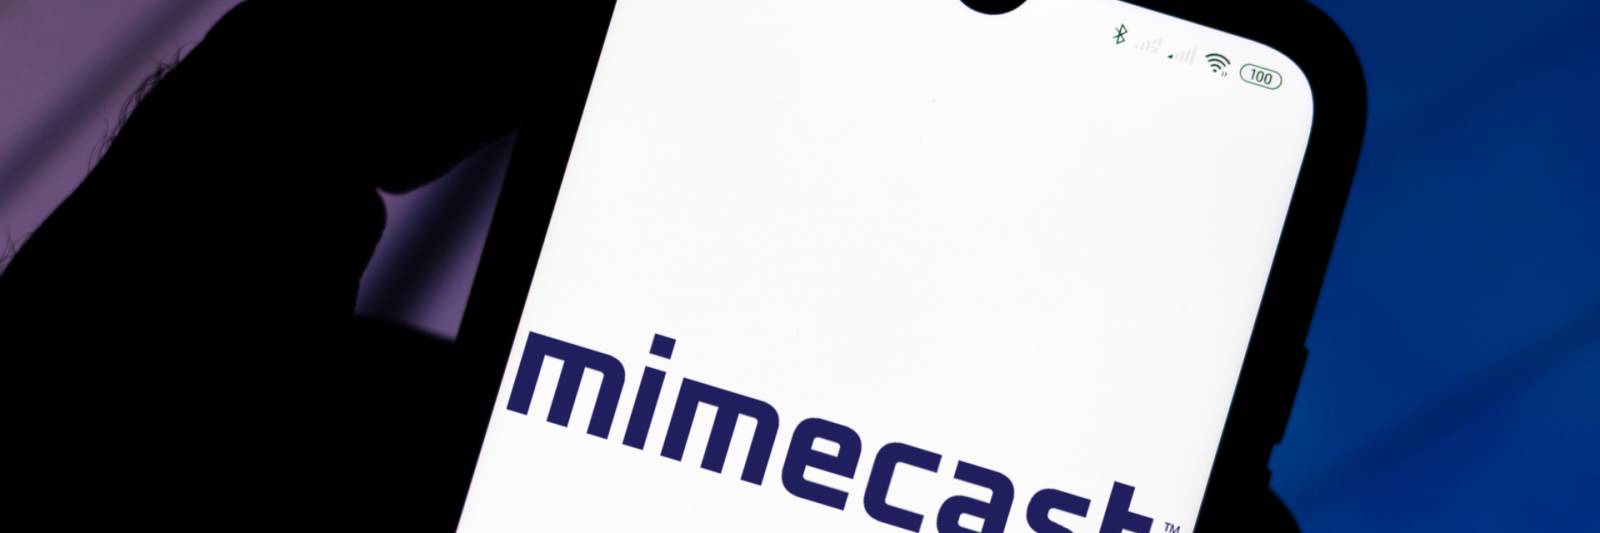 Mimecast Links Breach To Solarwinds Hackers